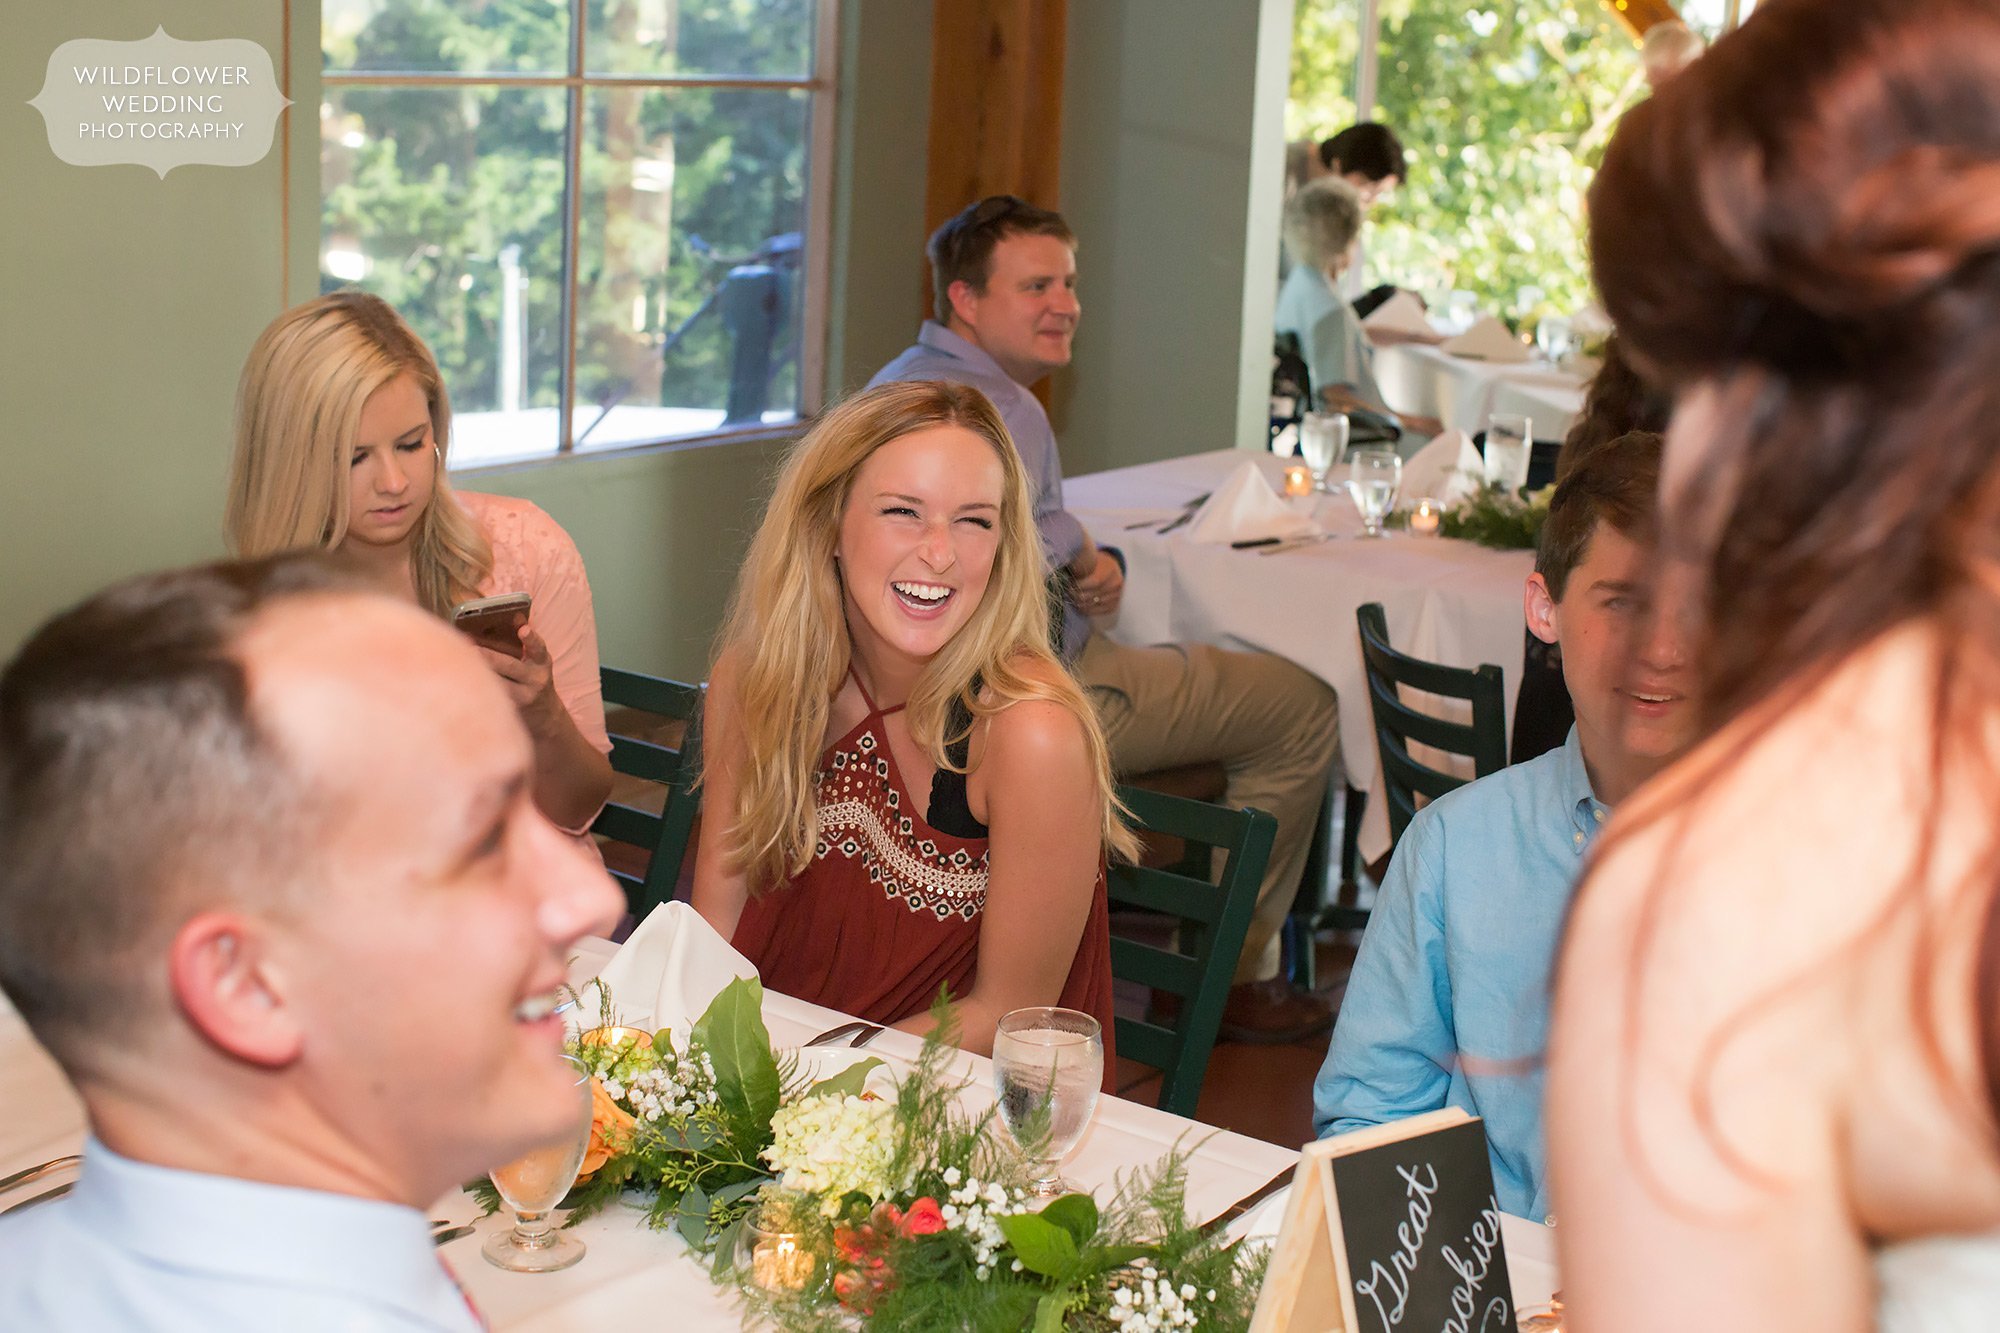 Wedding guests smiling and talking during wedding reception at Les Bourgeois Winery in MO.